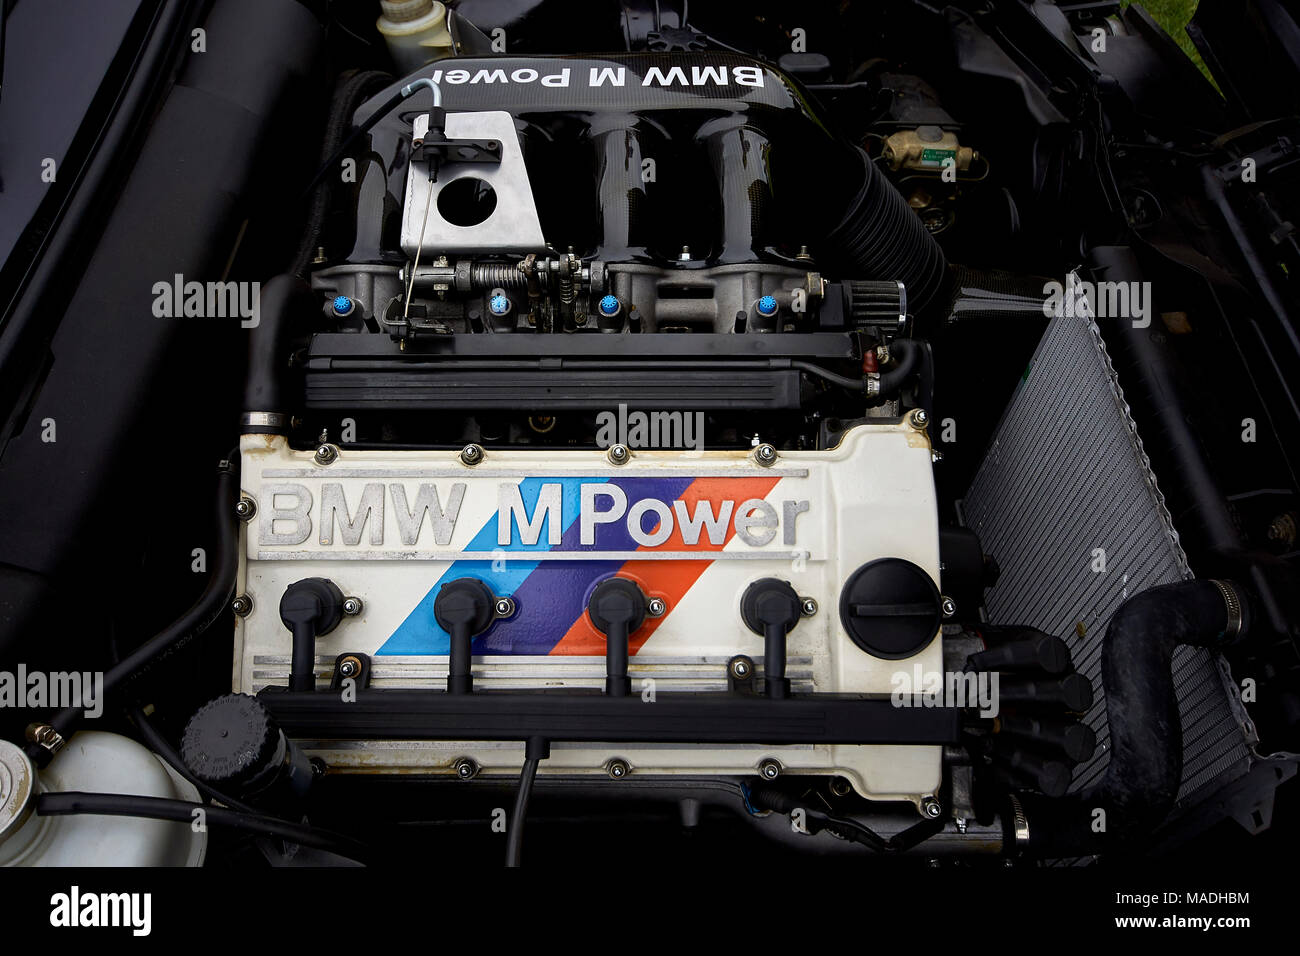 BMW M Power 4 cylinder engine head and other deatails Stock Photo